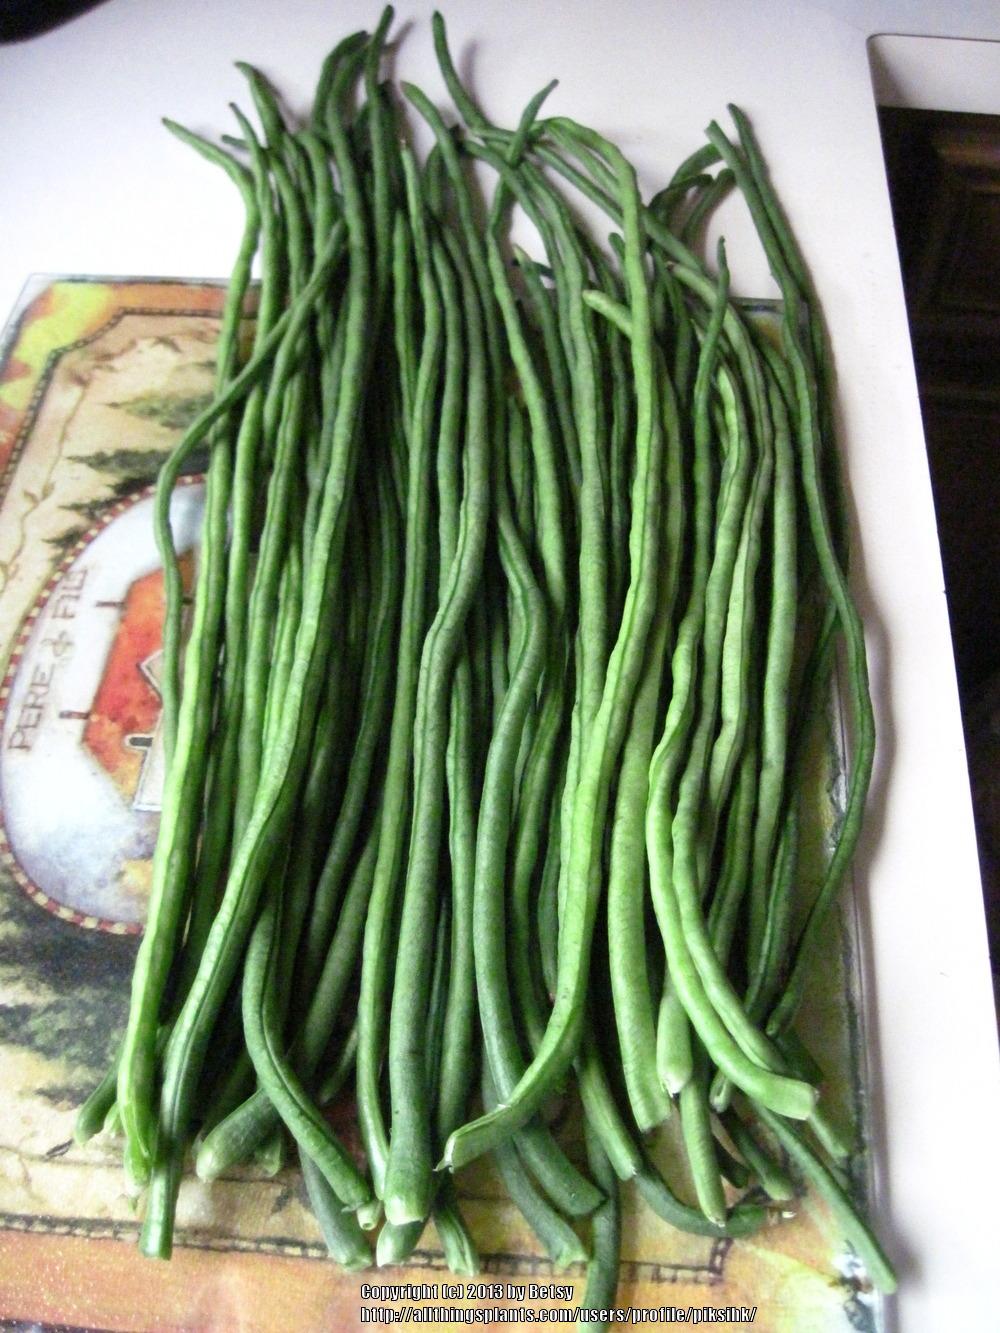 Photo of Yardlong Bean (Vigna unguiculata subsp. sesquipedalis) uploaded by piksihk